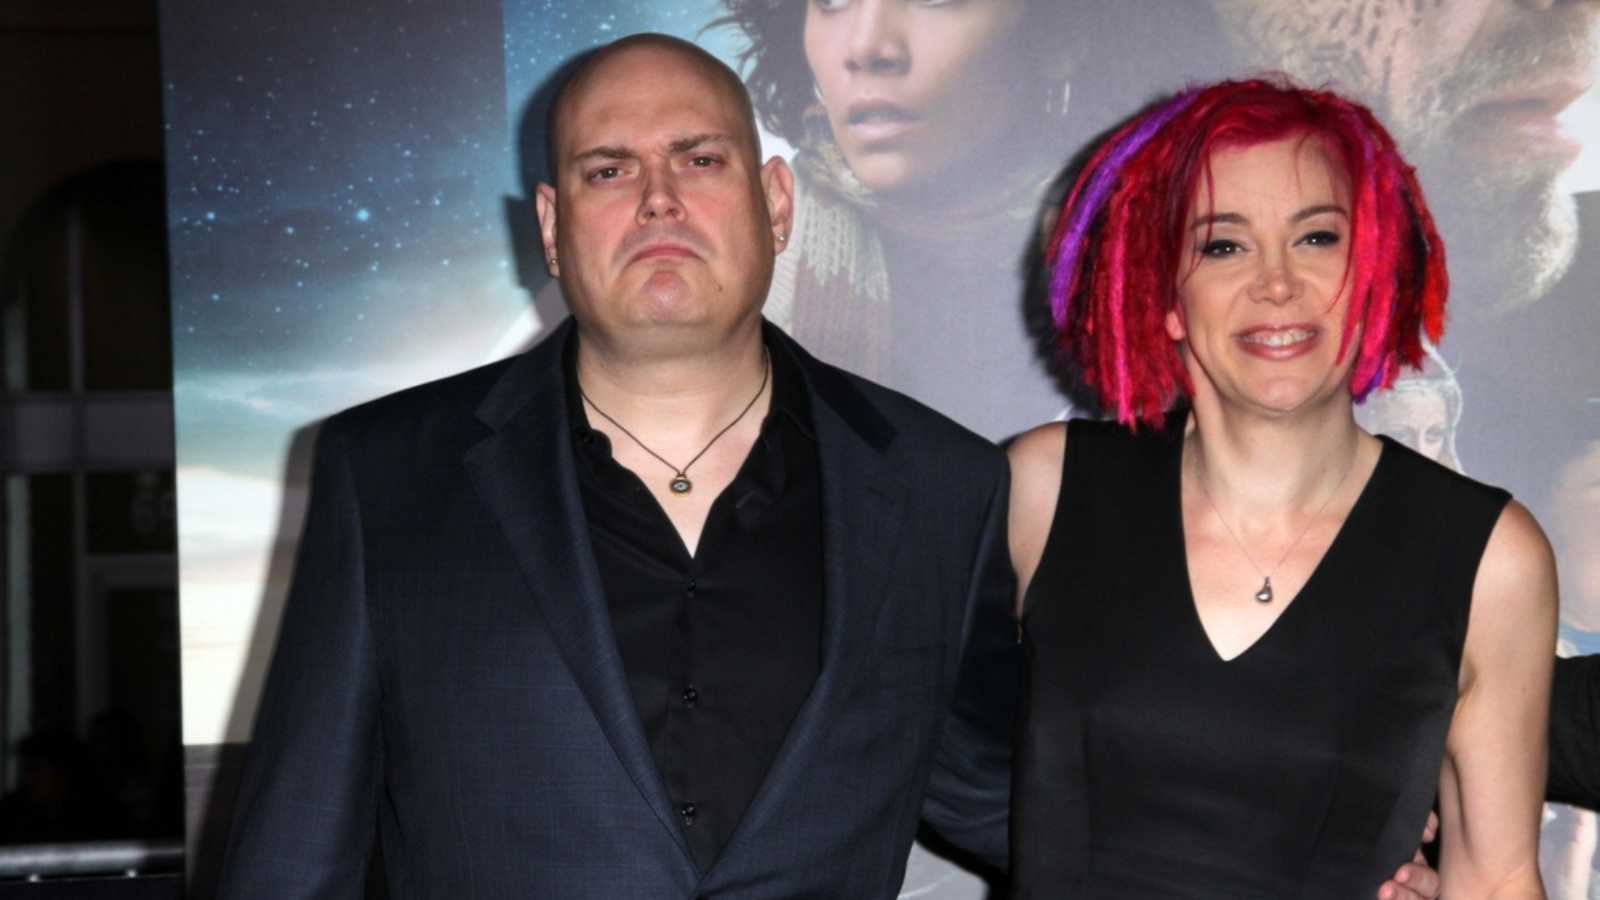 Andy Wachowski and Lana Wachowski at the "Cloud Atlas" Los Angeles Premiere, Chinese Theater, Hollywood, CA 10-24-12